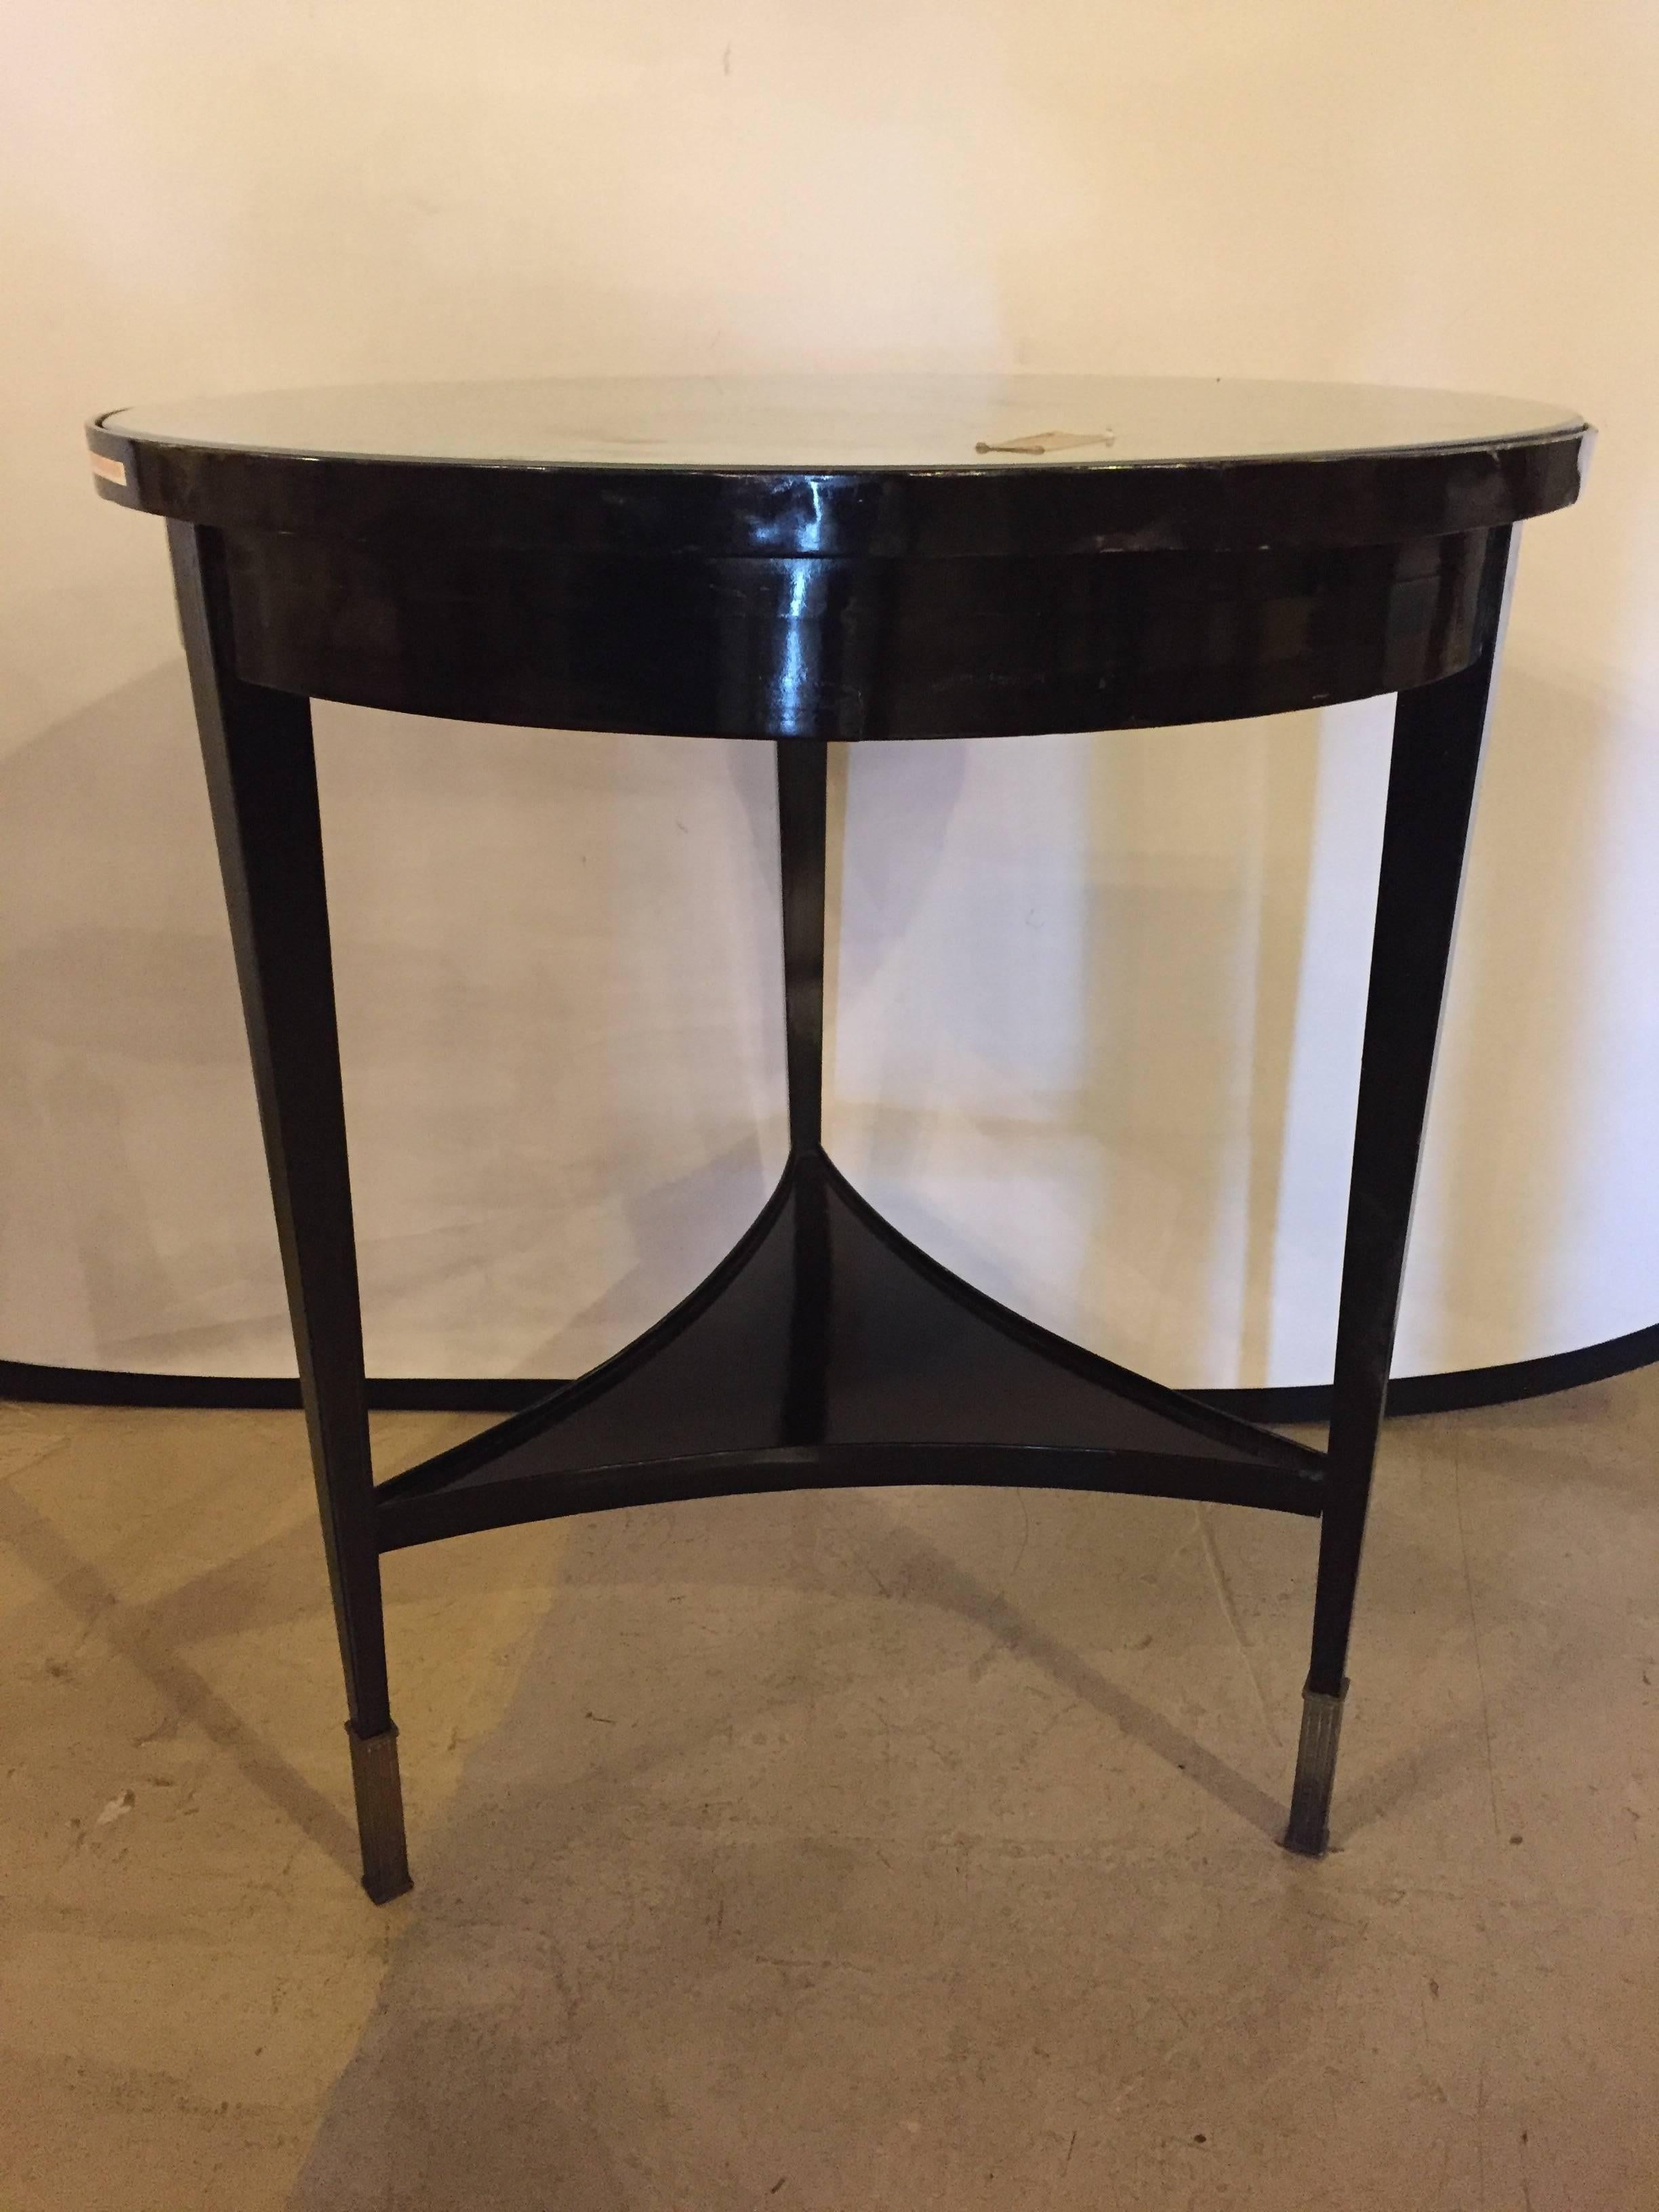 An ebonized silver gilt mirror top centre or end table. On bronze sabots having tapering legs with a lower triangular inverted shelf this sleek and stylish end table is certain to add that Hollywood Regency charm that is highly sought after.